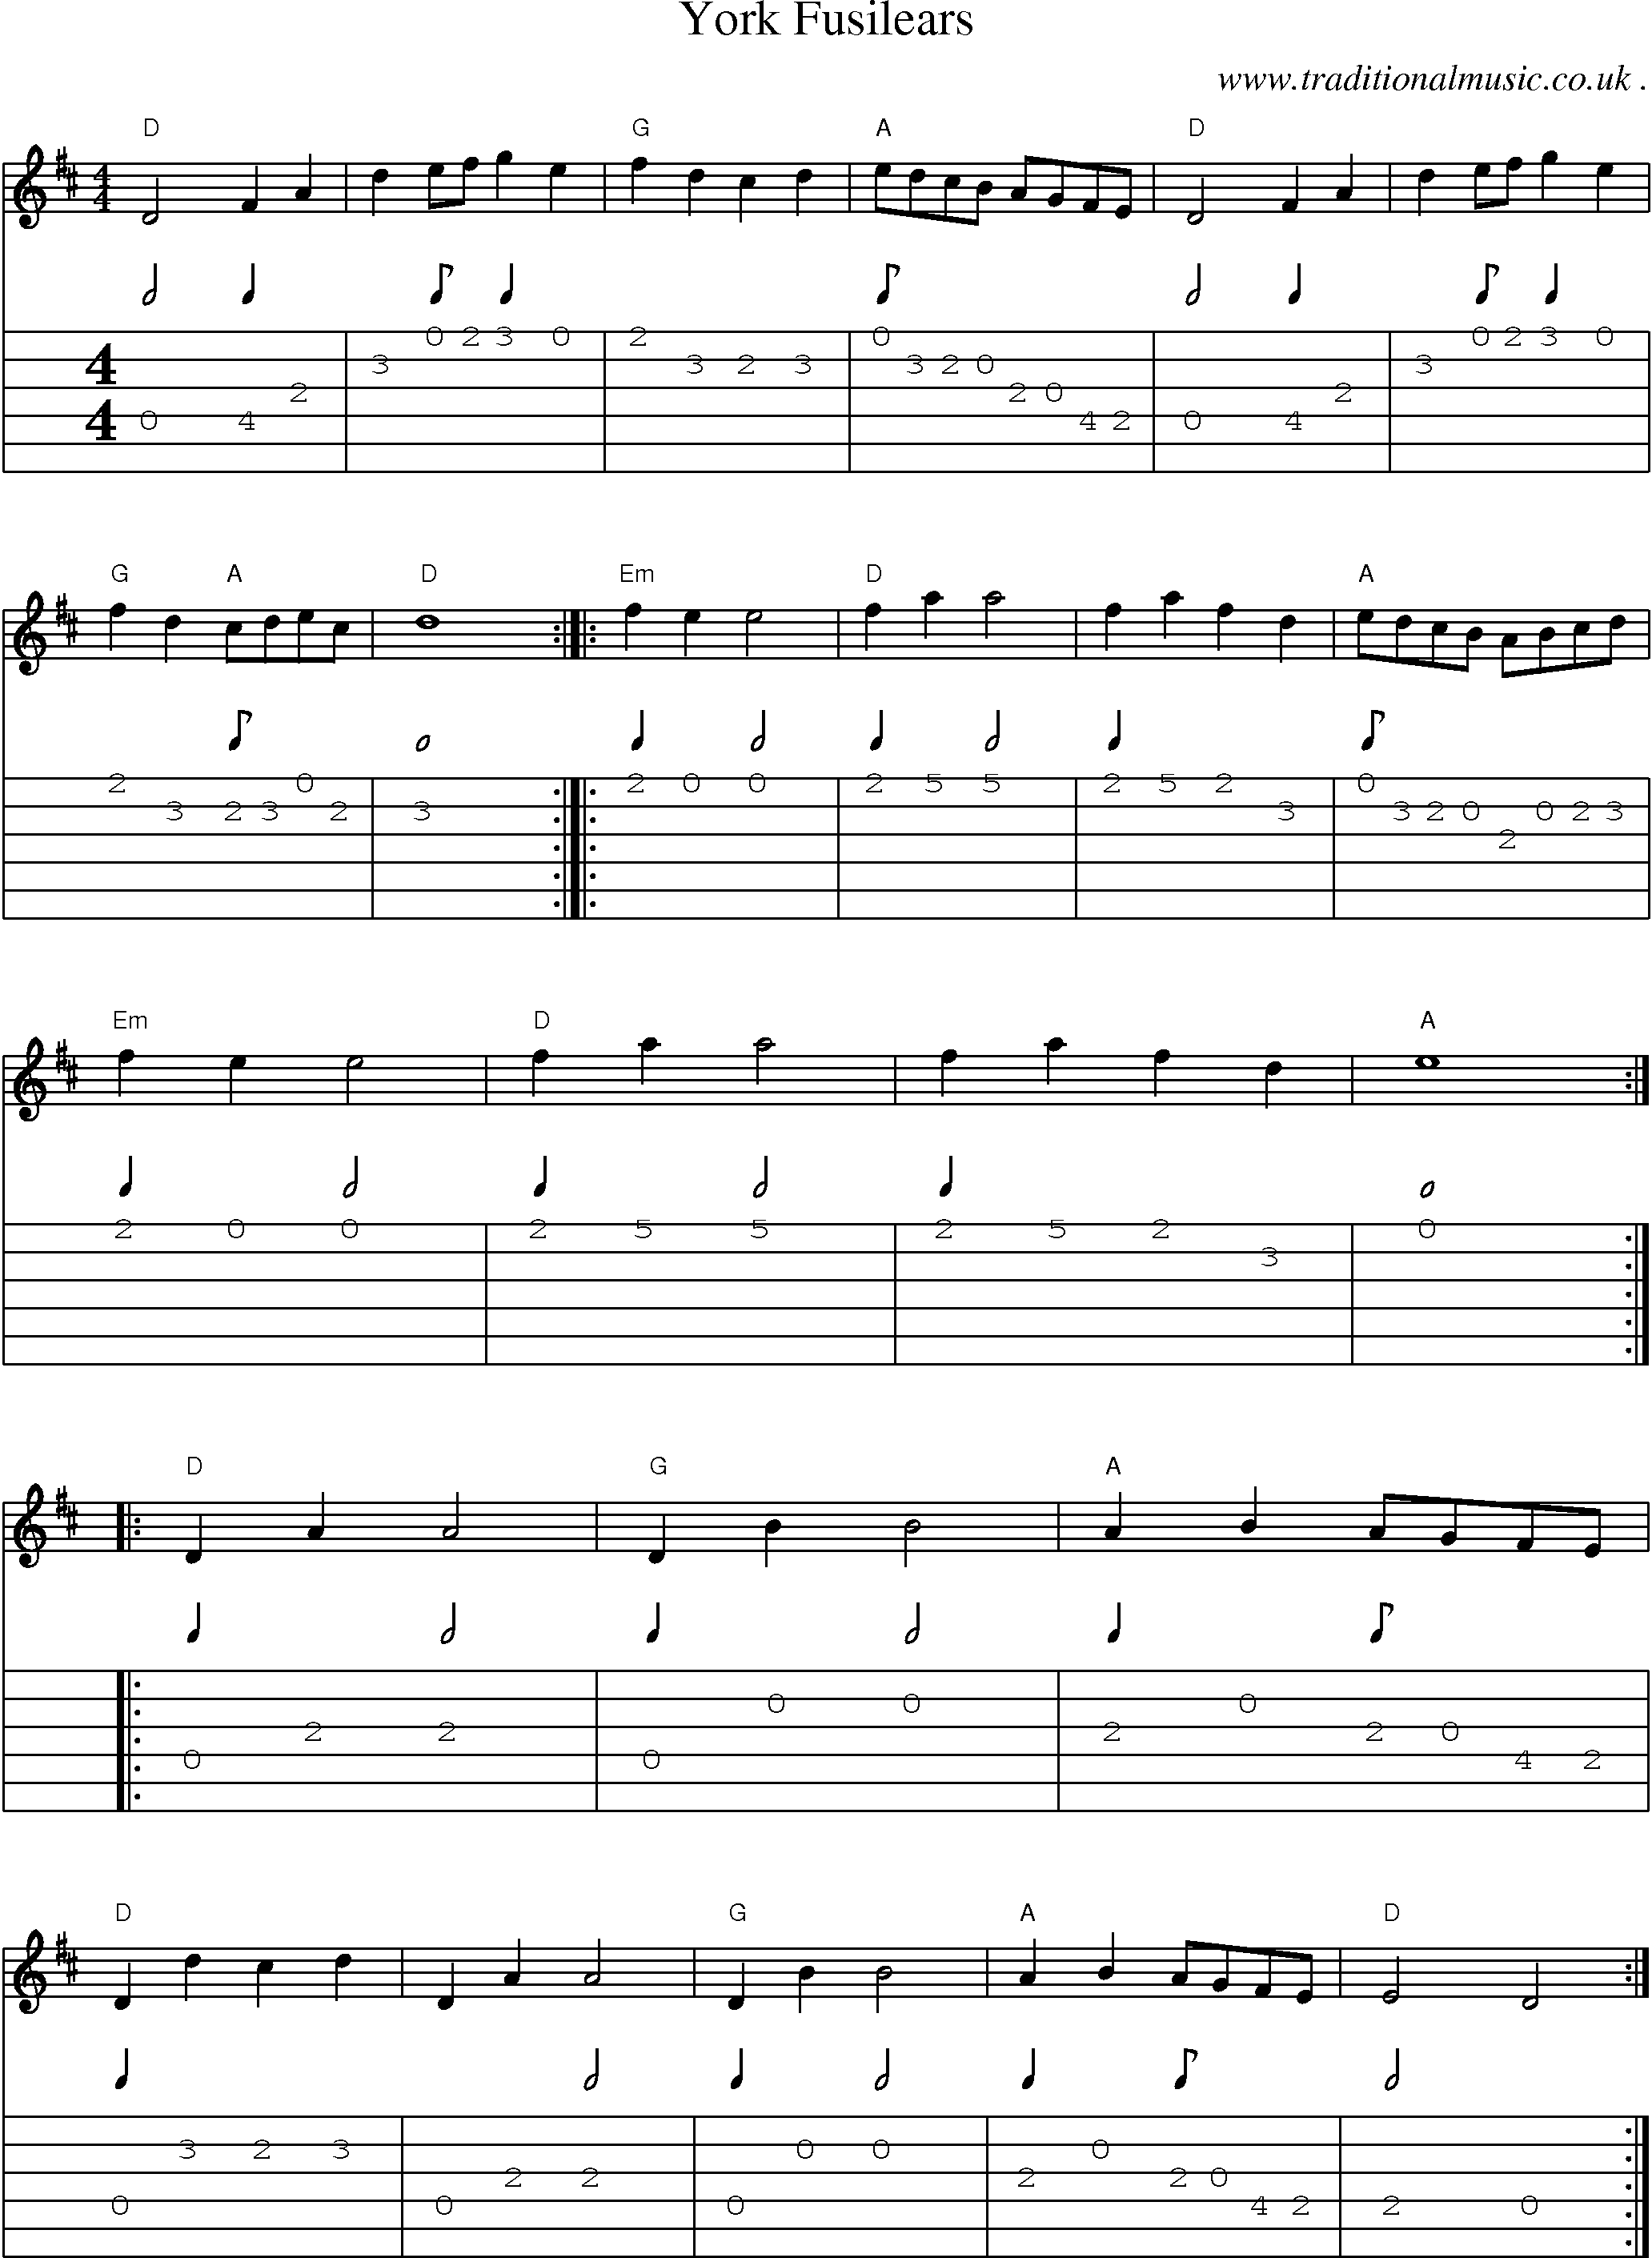 Sheet-Music and Guitar Tabs for York Fusilears